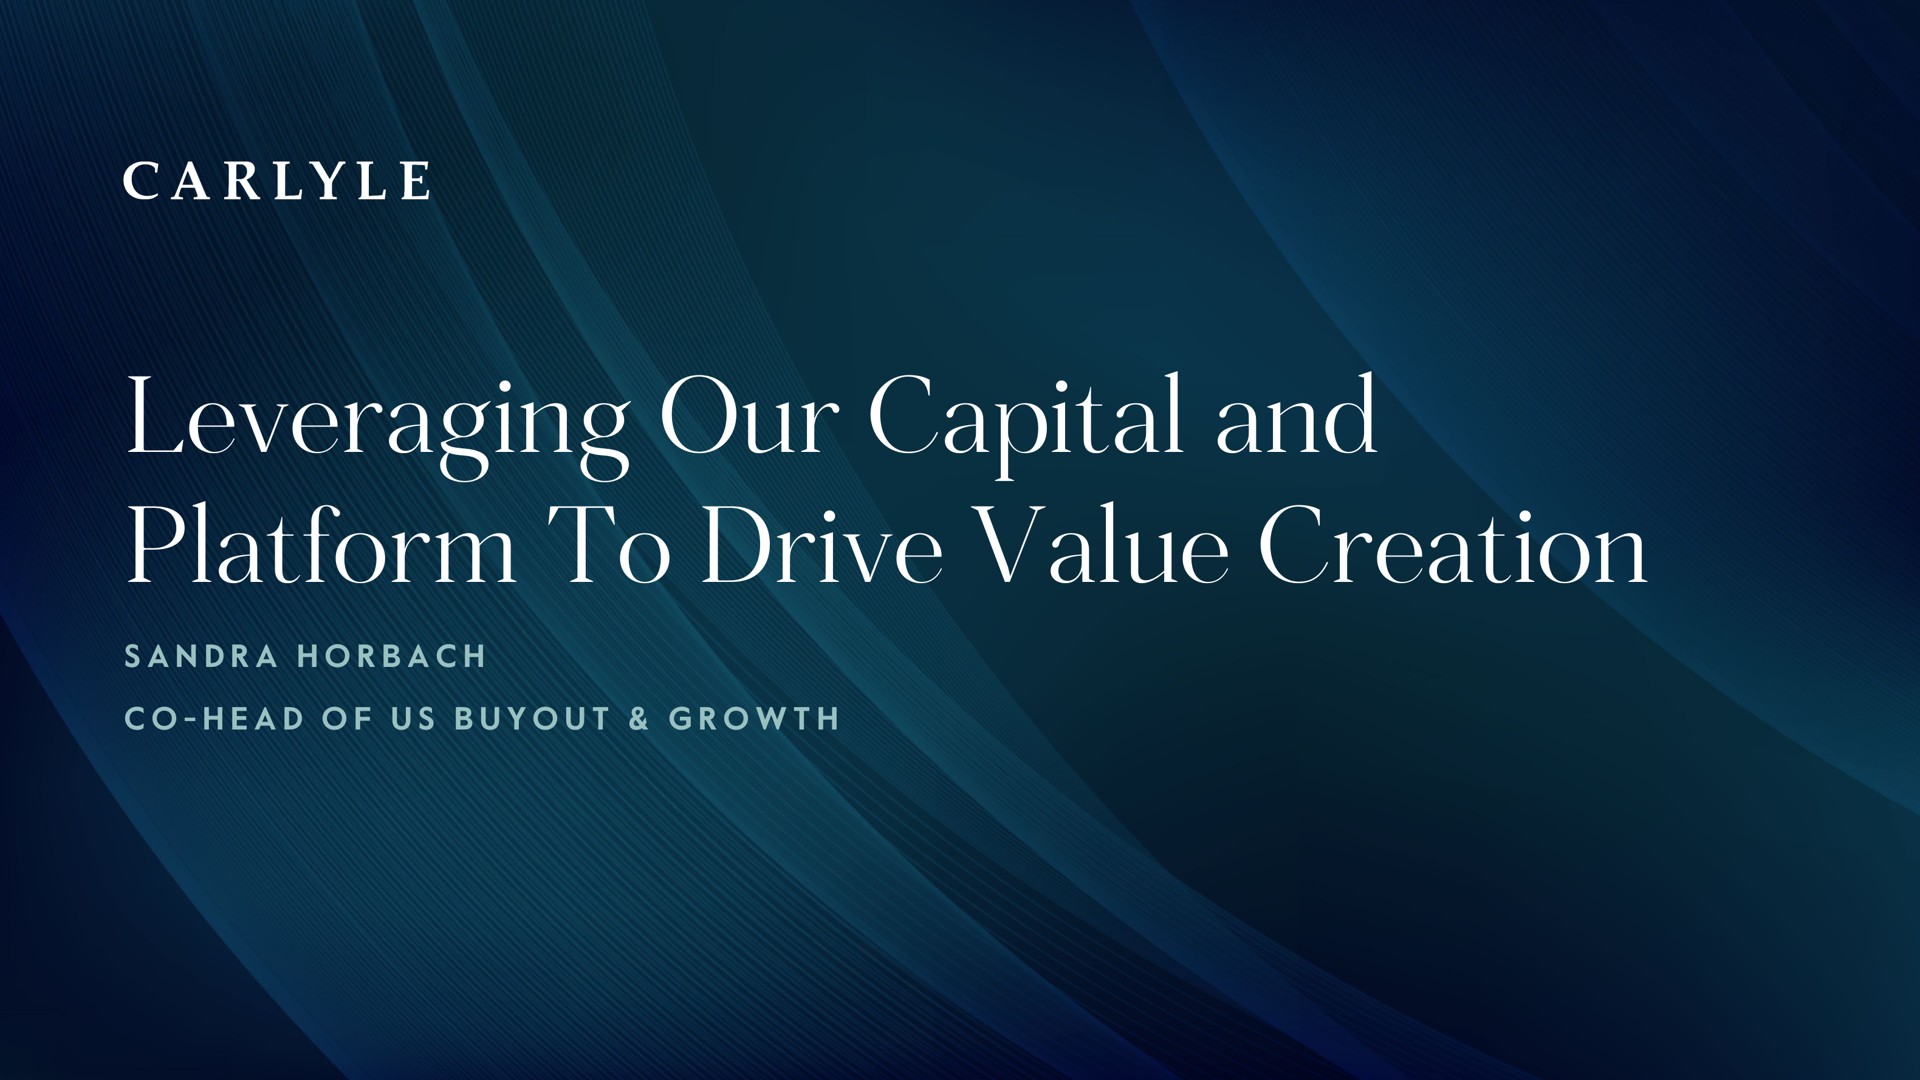 leveraging our capital and platform to drive value creation | Carlyle